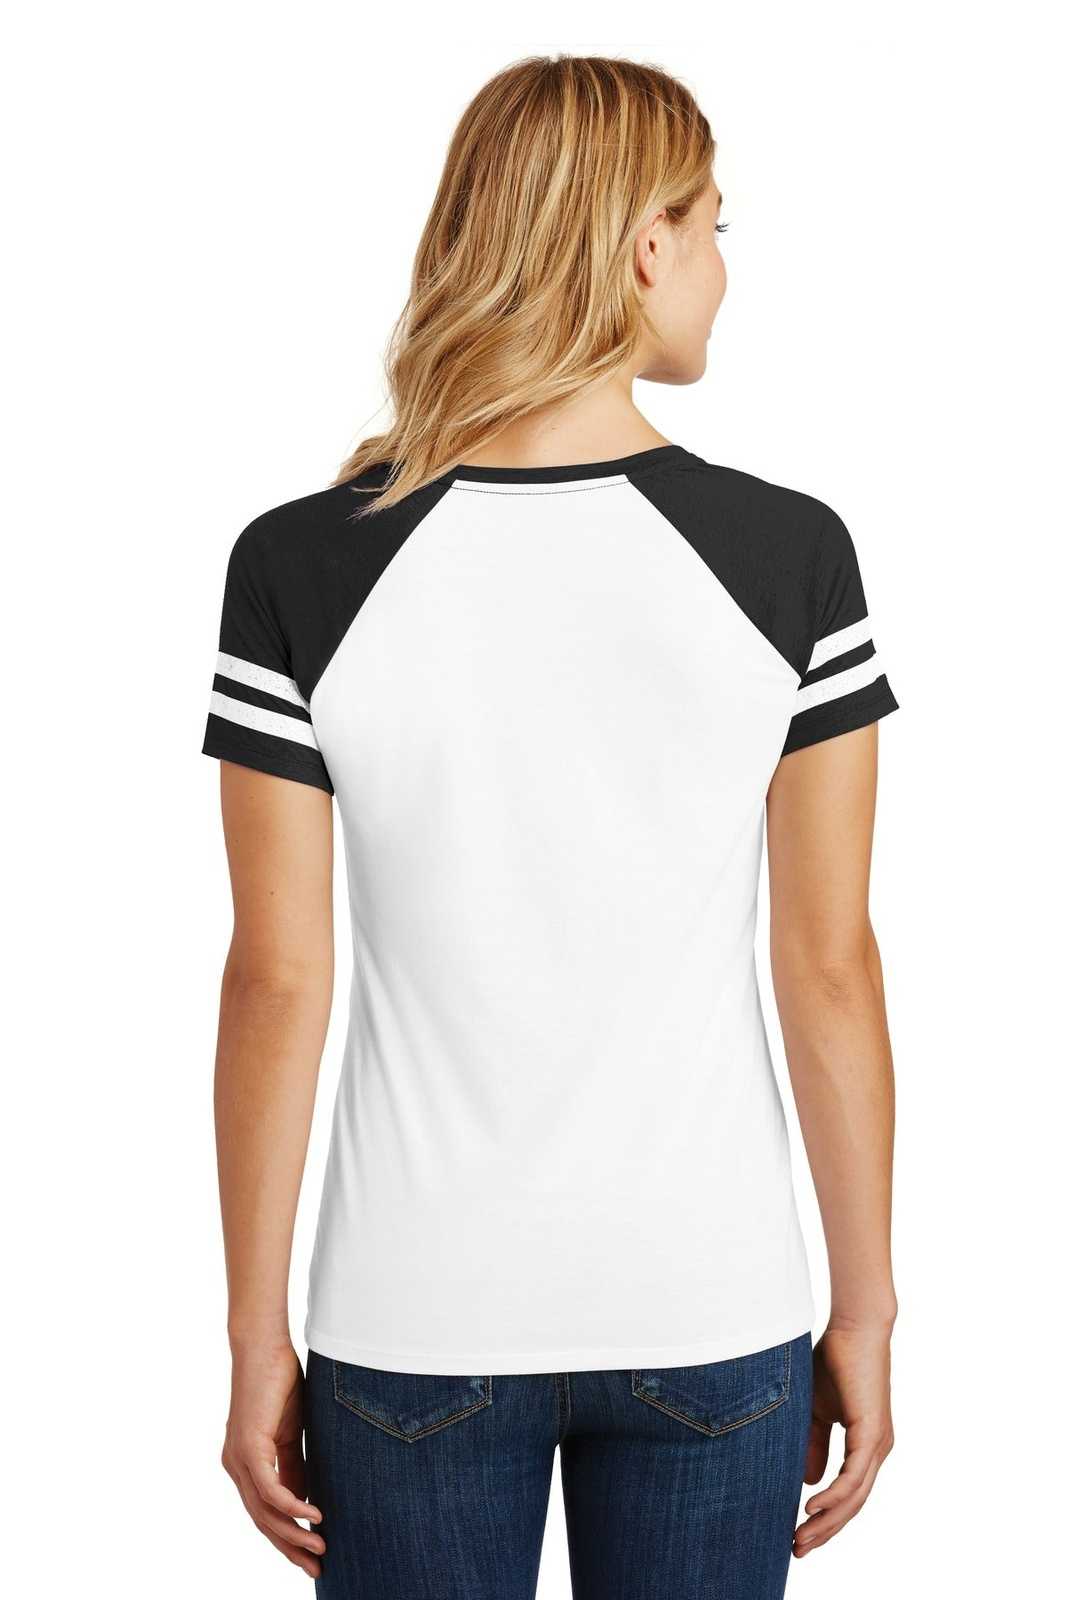 District DM476 Women's Game V-Neck Tee - White Black - HIT a Double - 1